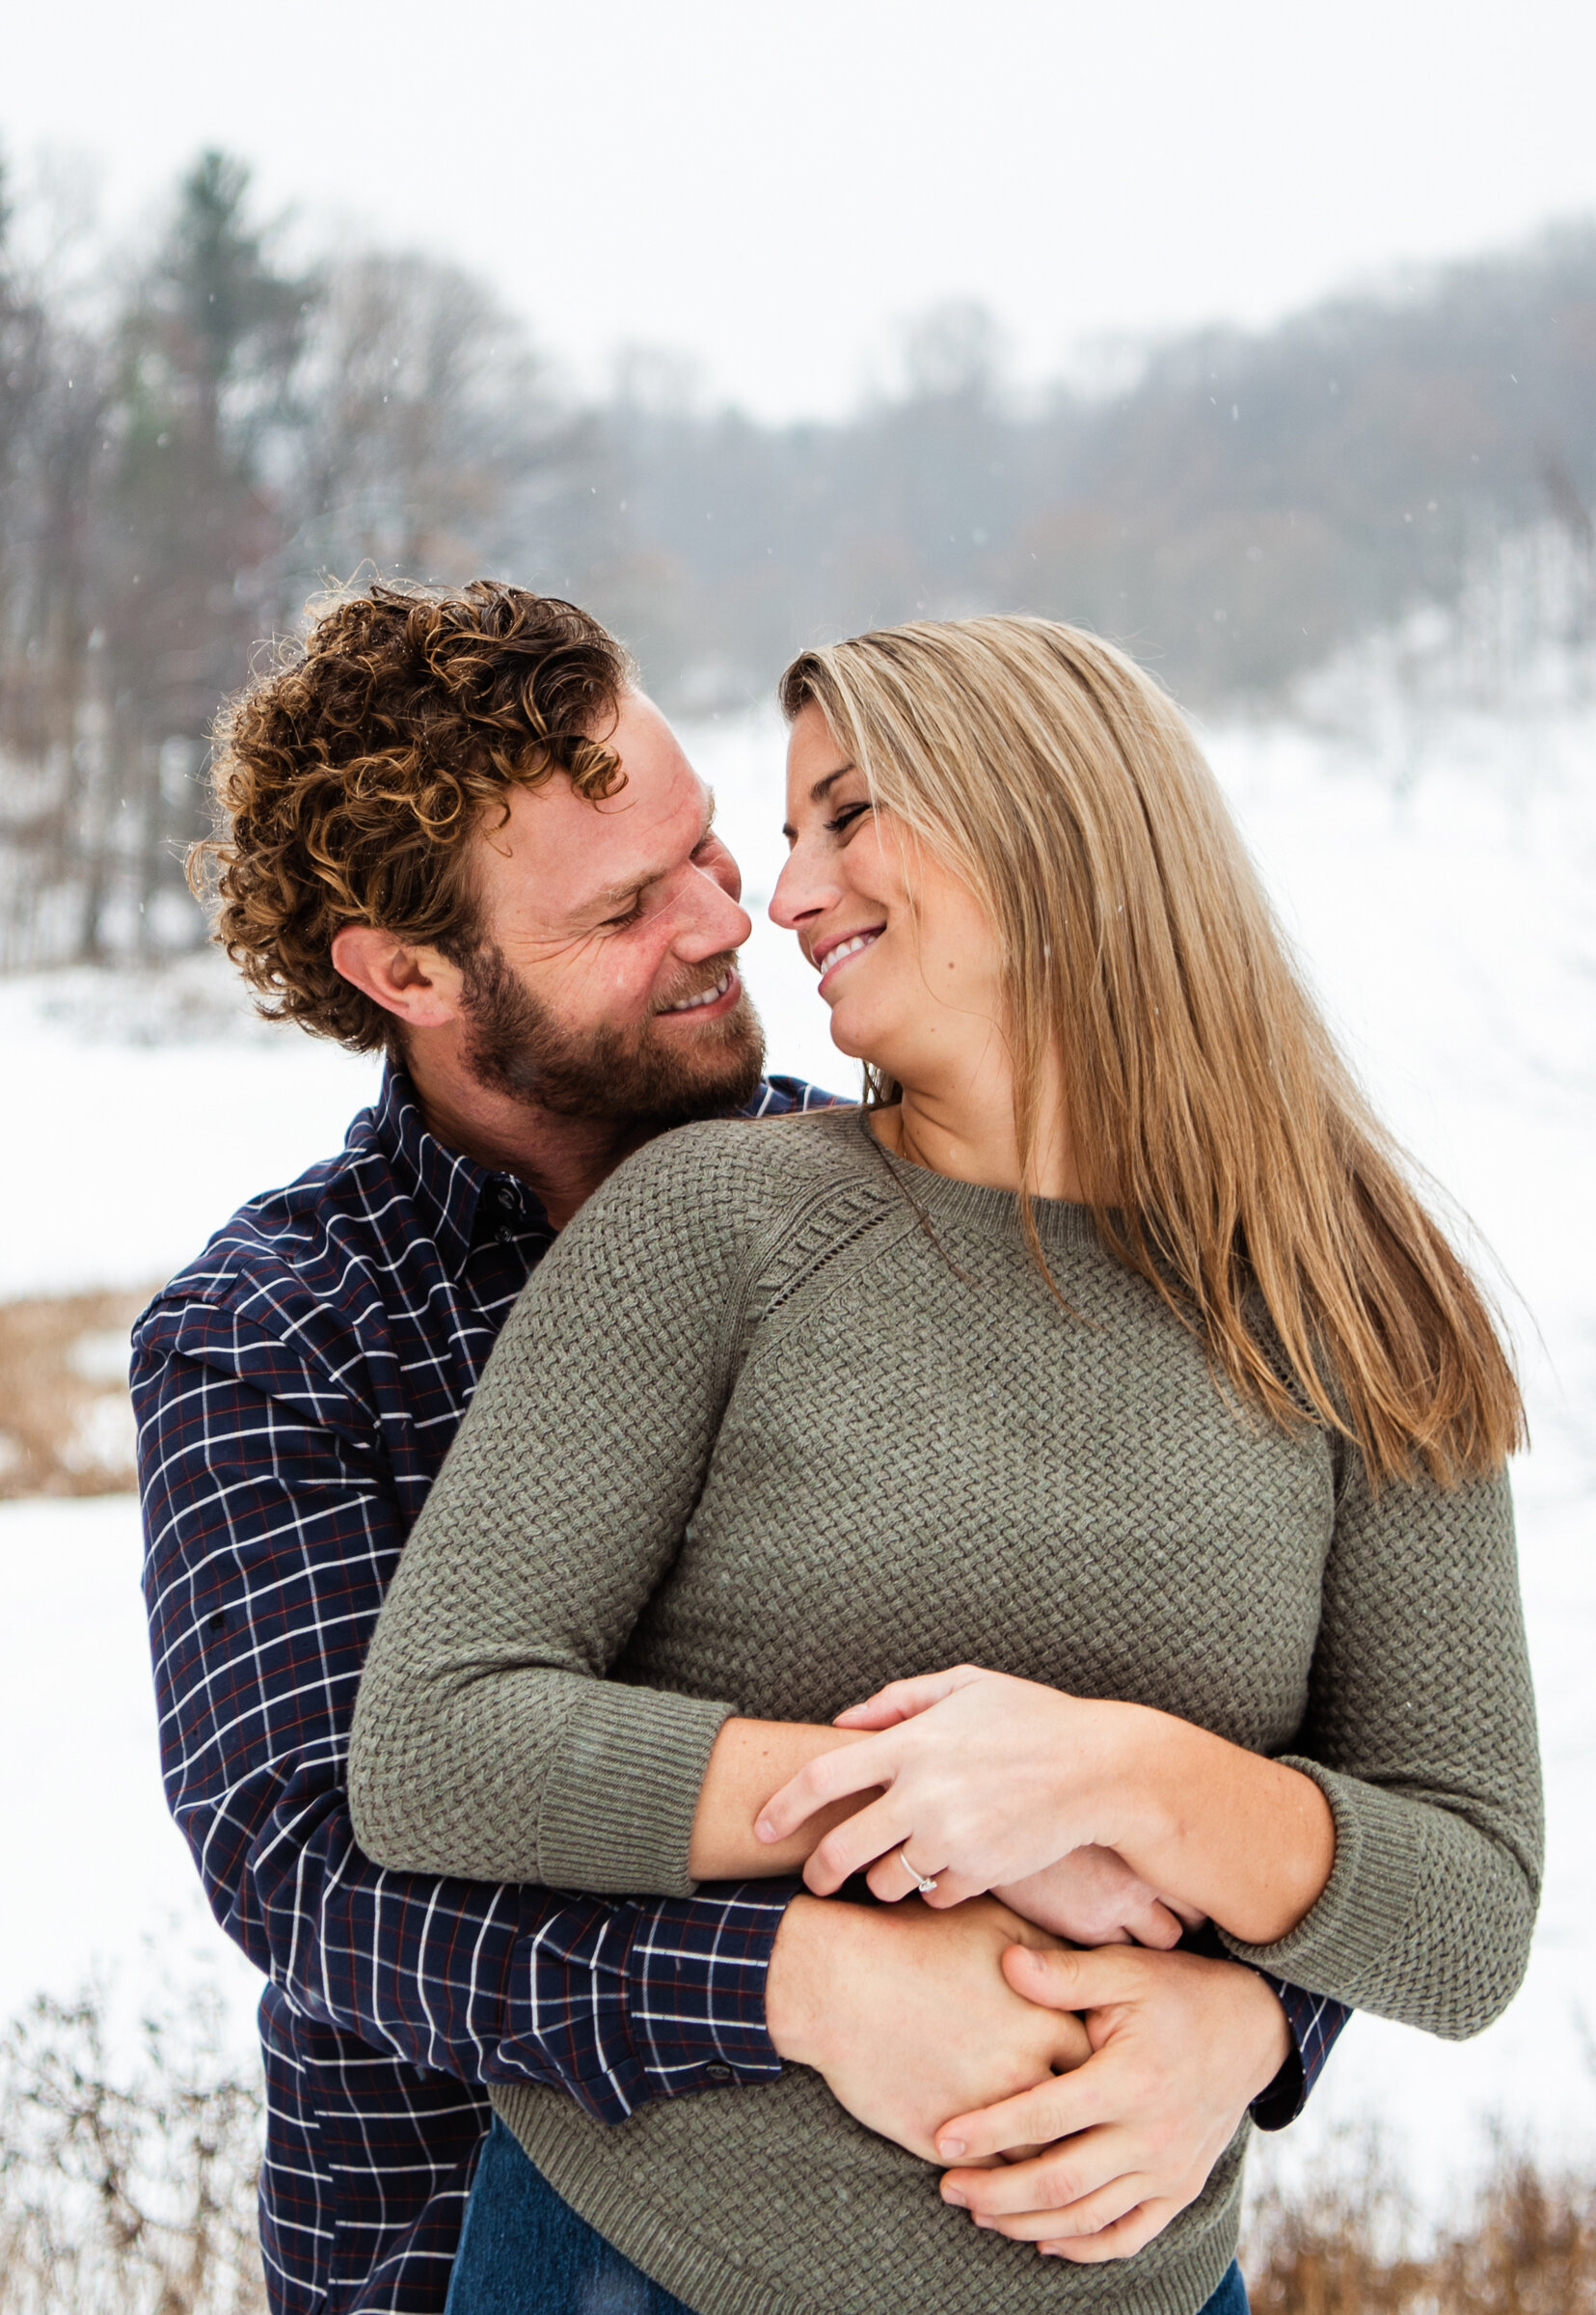 Irondequoit_Beer_Company_Durand_Eastman_Park_Rochester_Engagement_Session_JILL_STUDIO_Rochester_NY_Photographer_7088.jpg